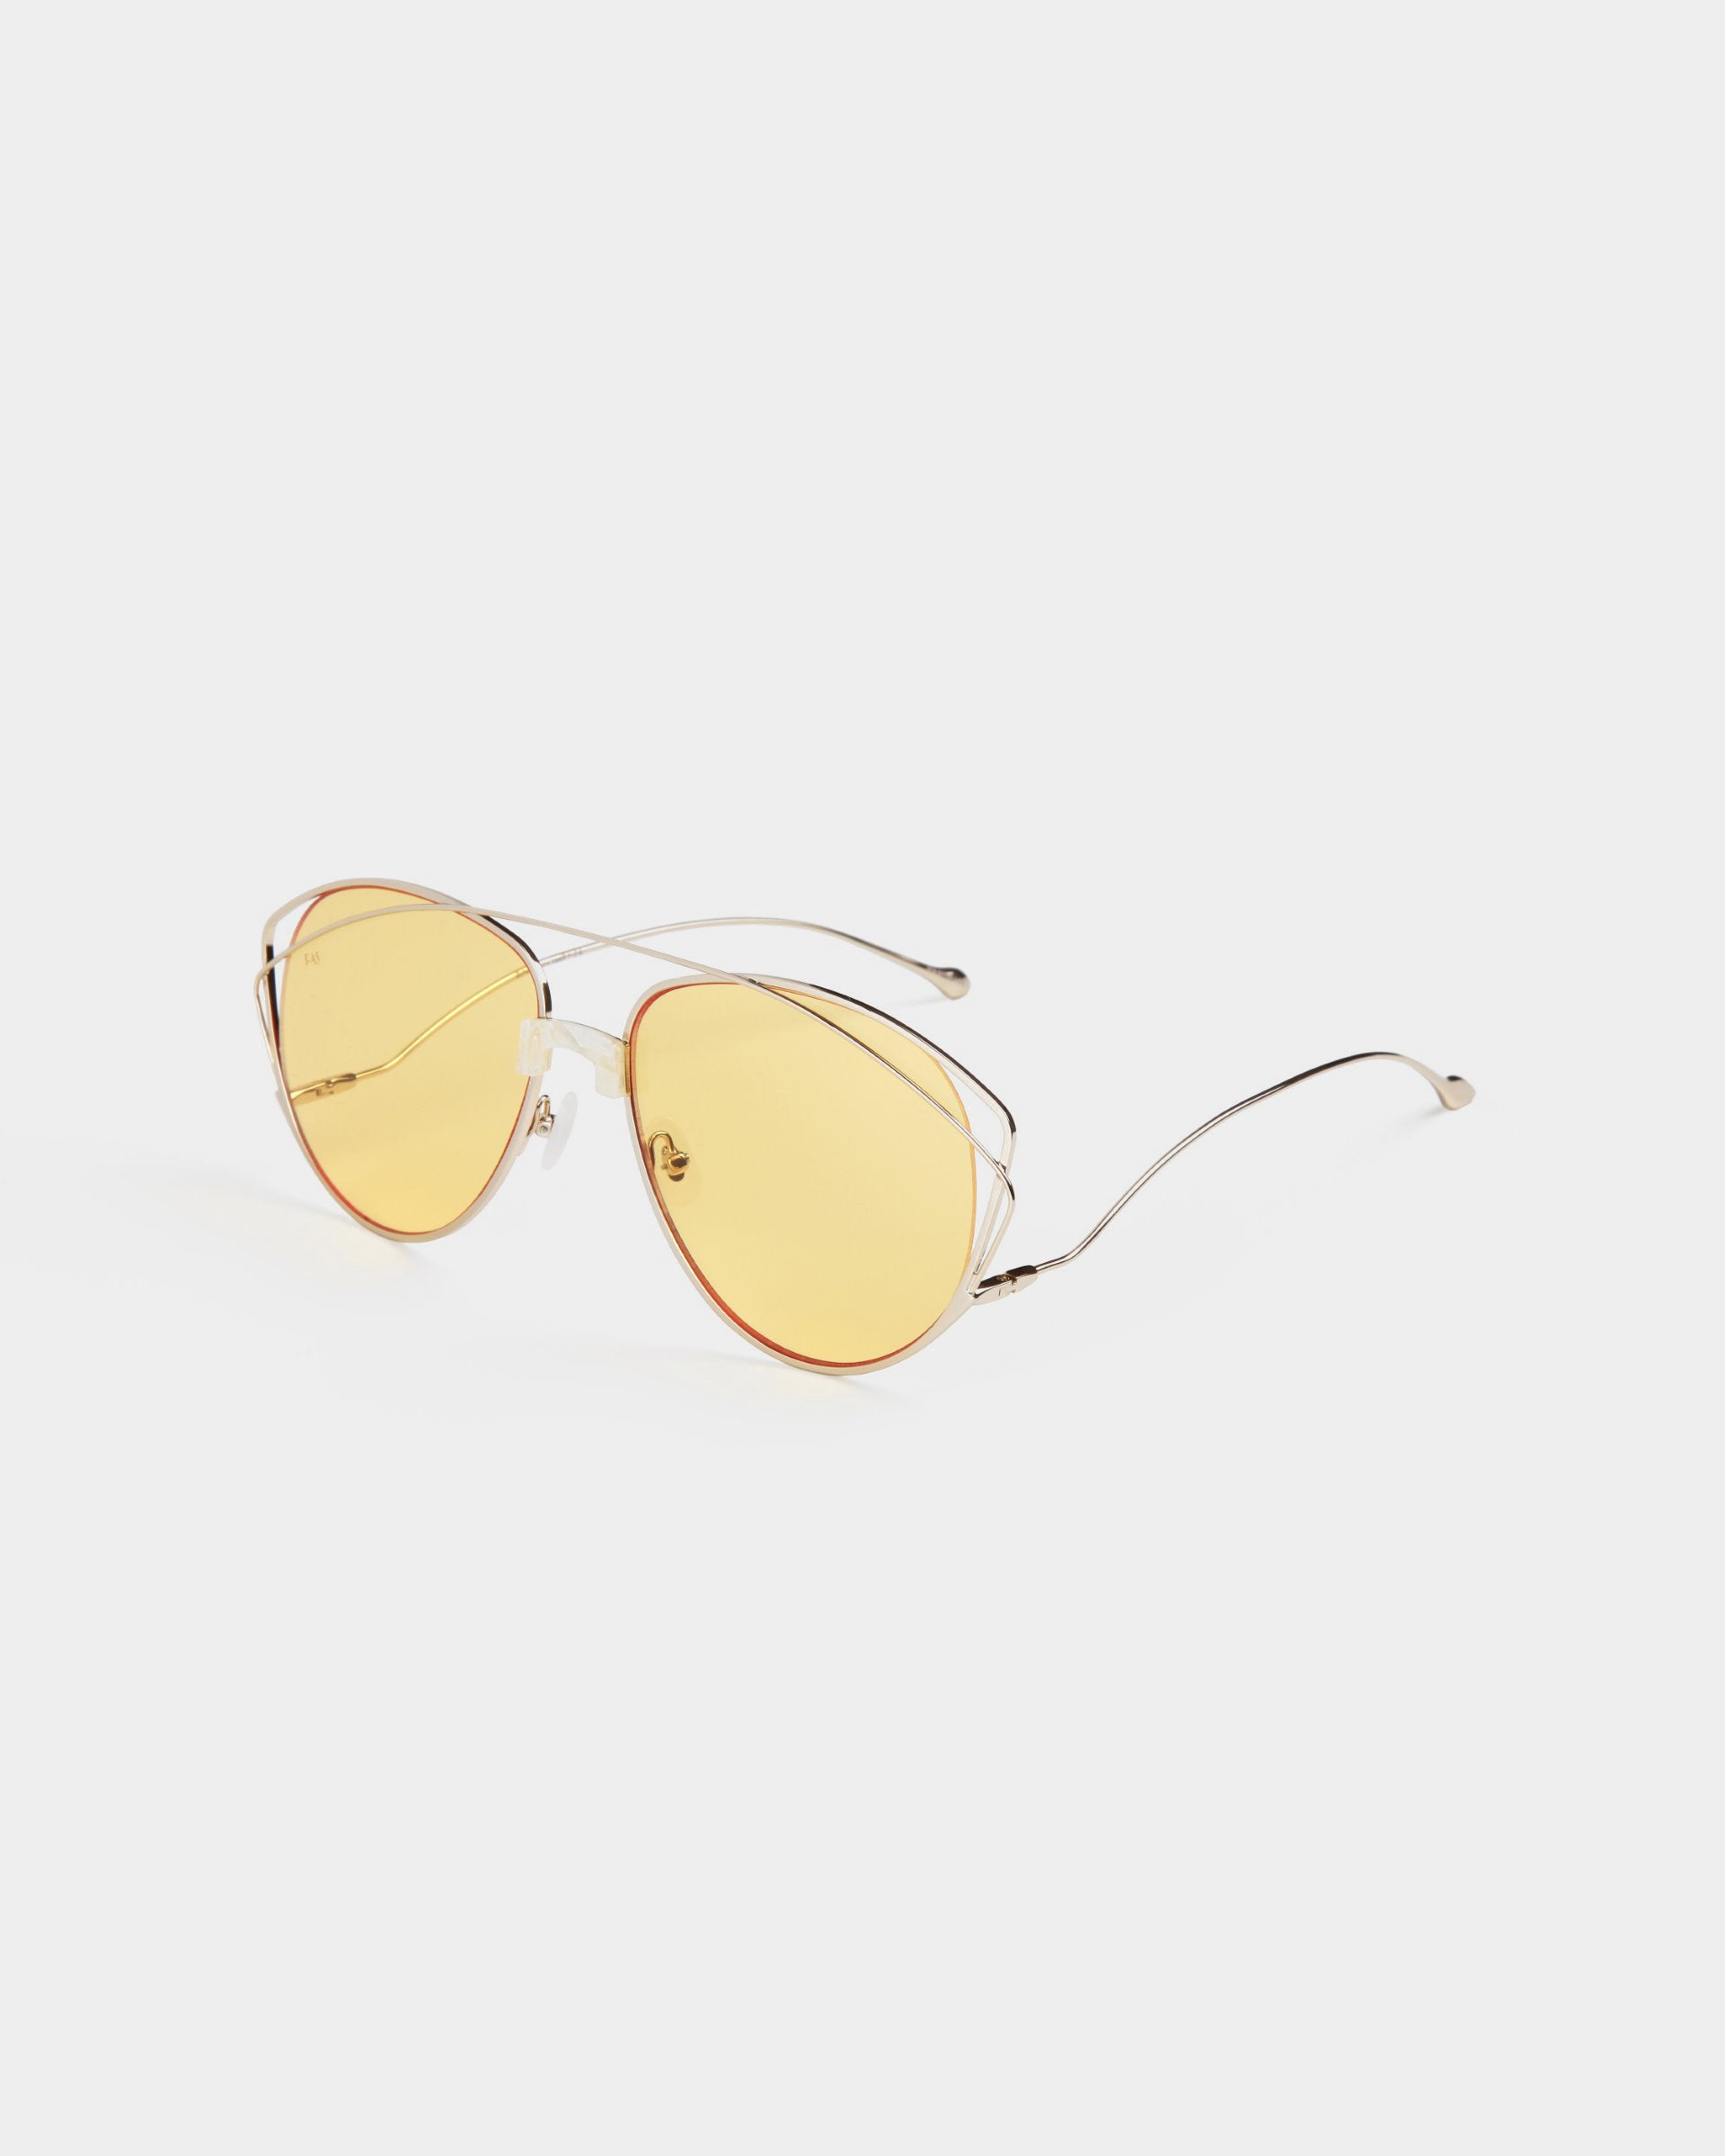 A pair of aviator-style sunglasses with slender stainless steel frames and amber-tinted nylon lenses is shown against a white background. Boasting 100% UV protection, the arms of the For Art's Sake® Dark Eyes glasses are thin and slightly curved at the tips.